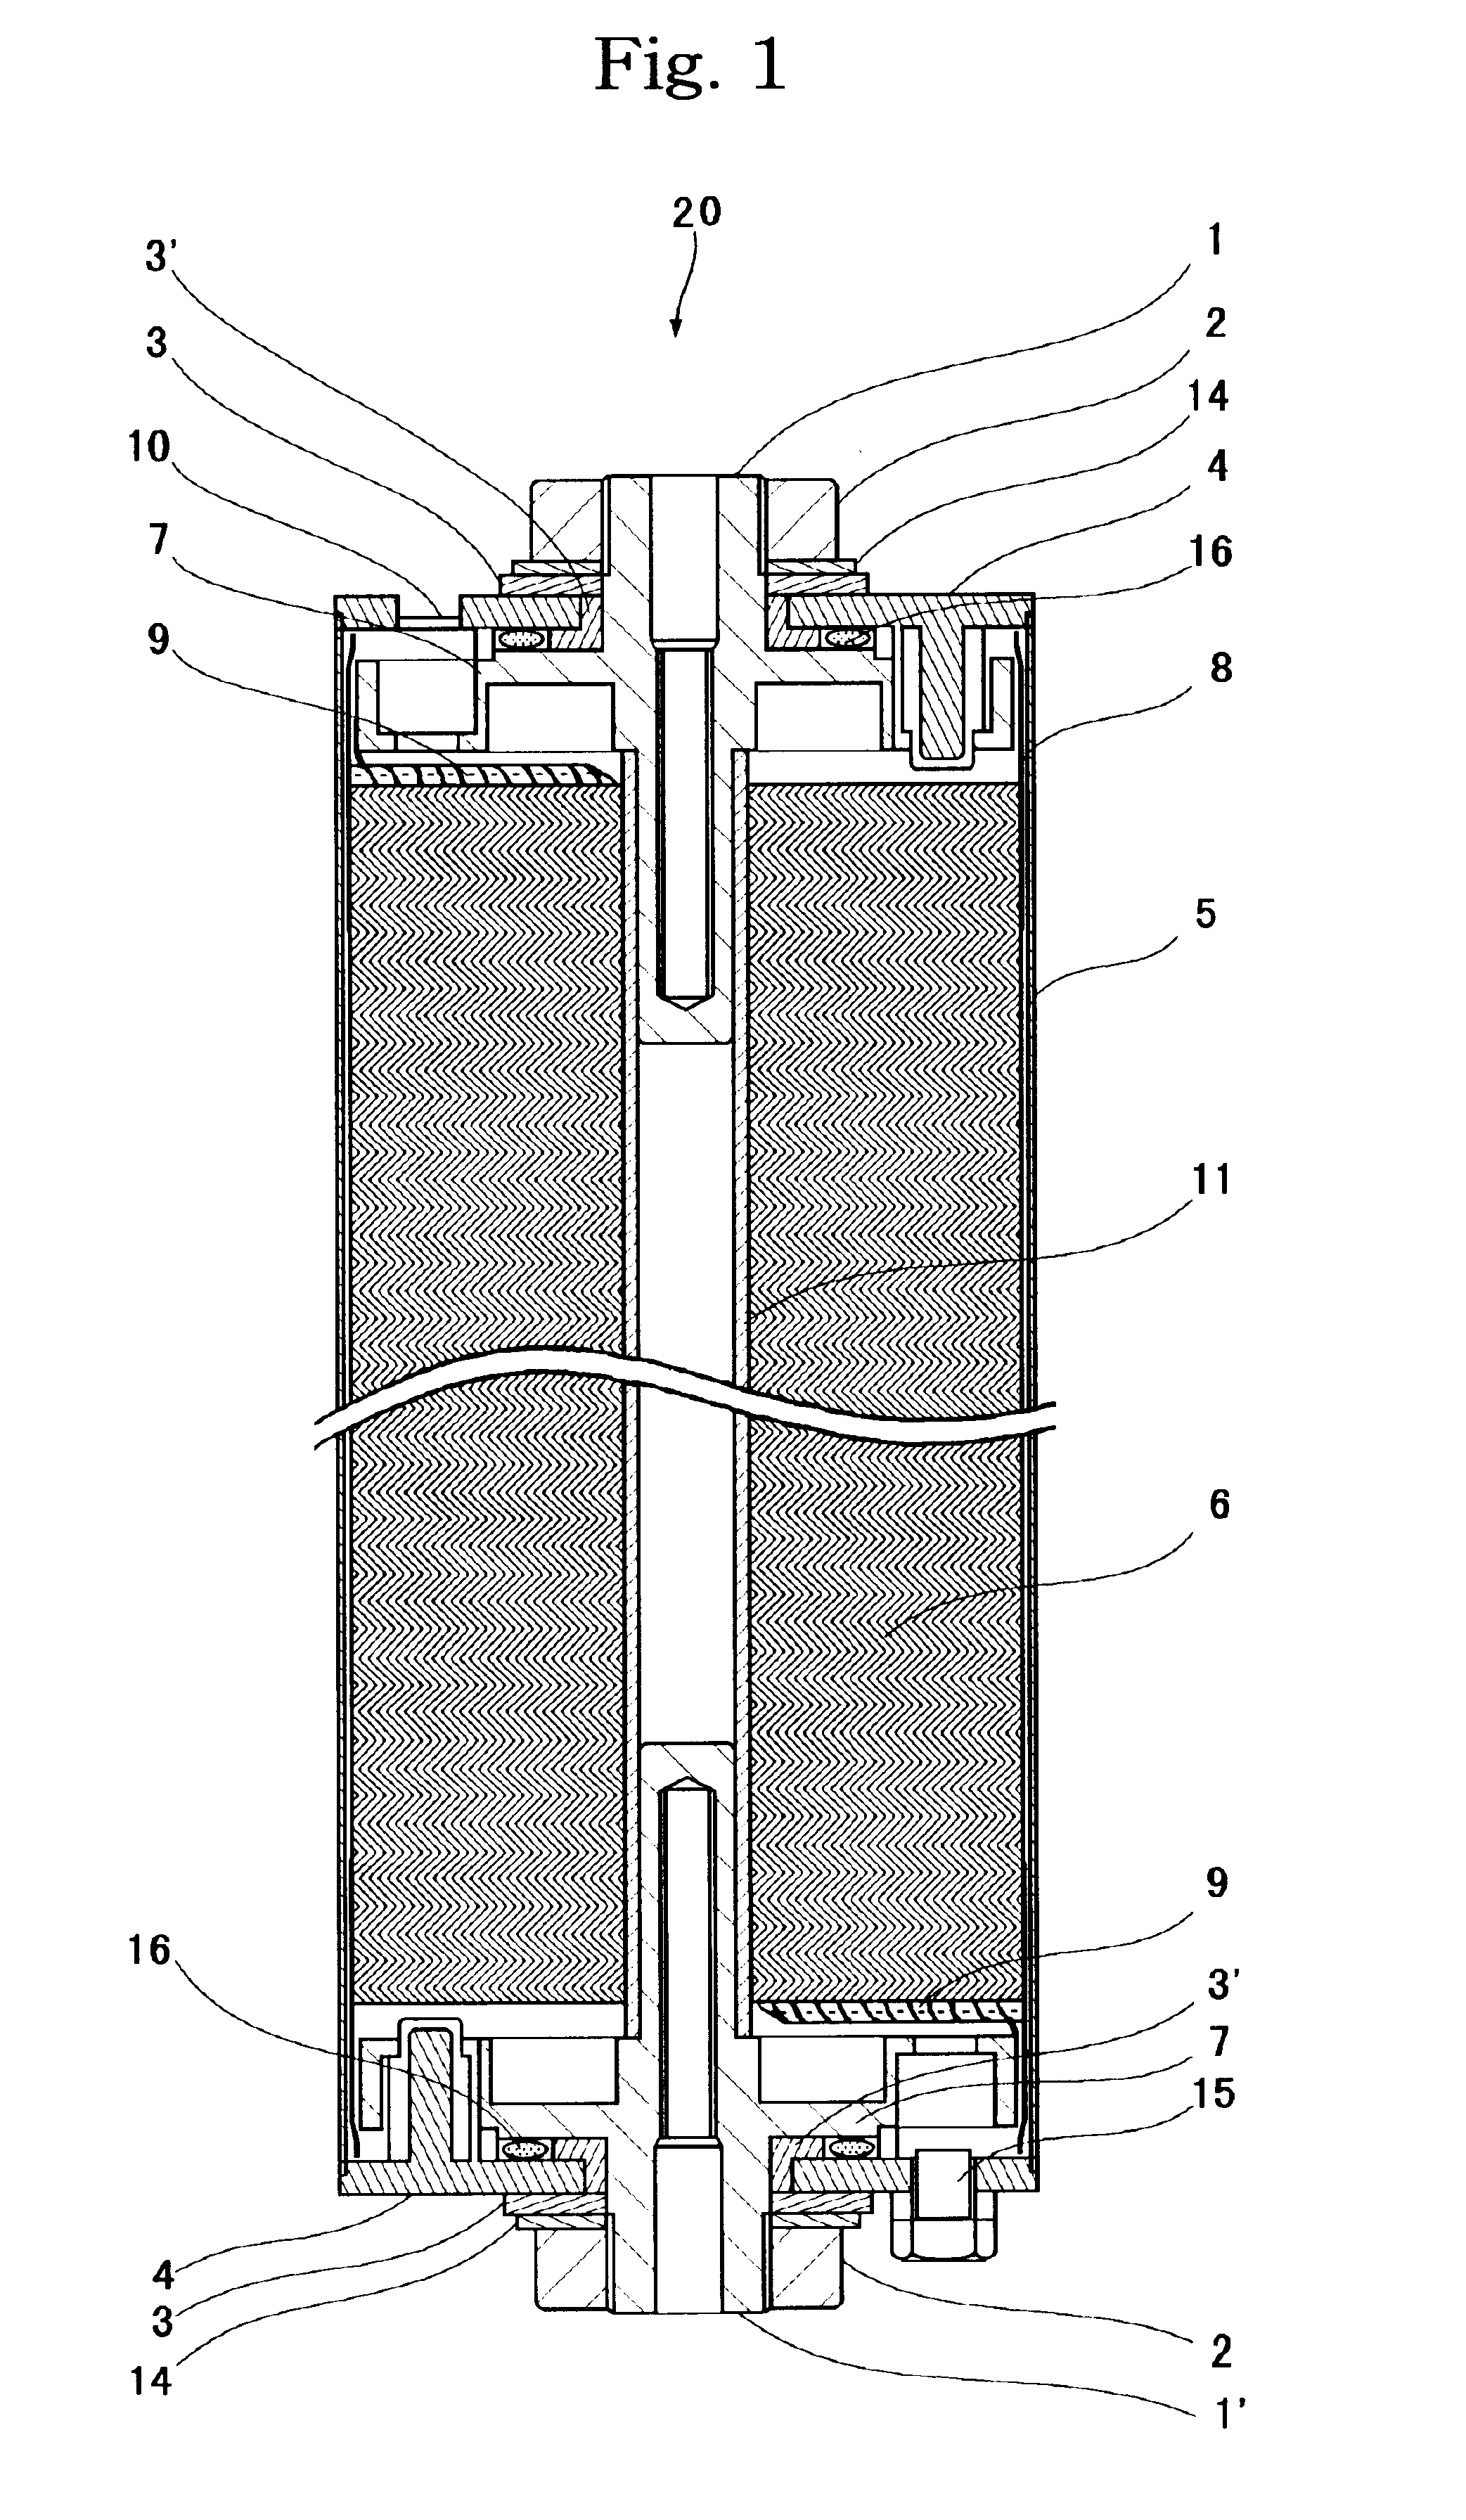 Non-aqueous electrolytic solution secondary battery with electrodes having a specific thickness and porosity